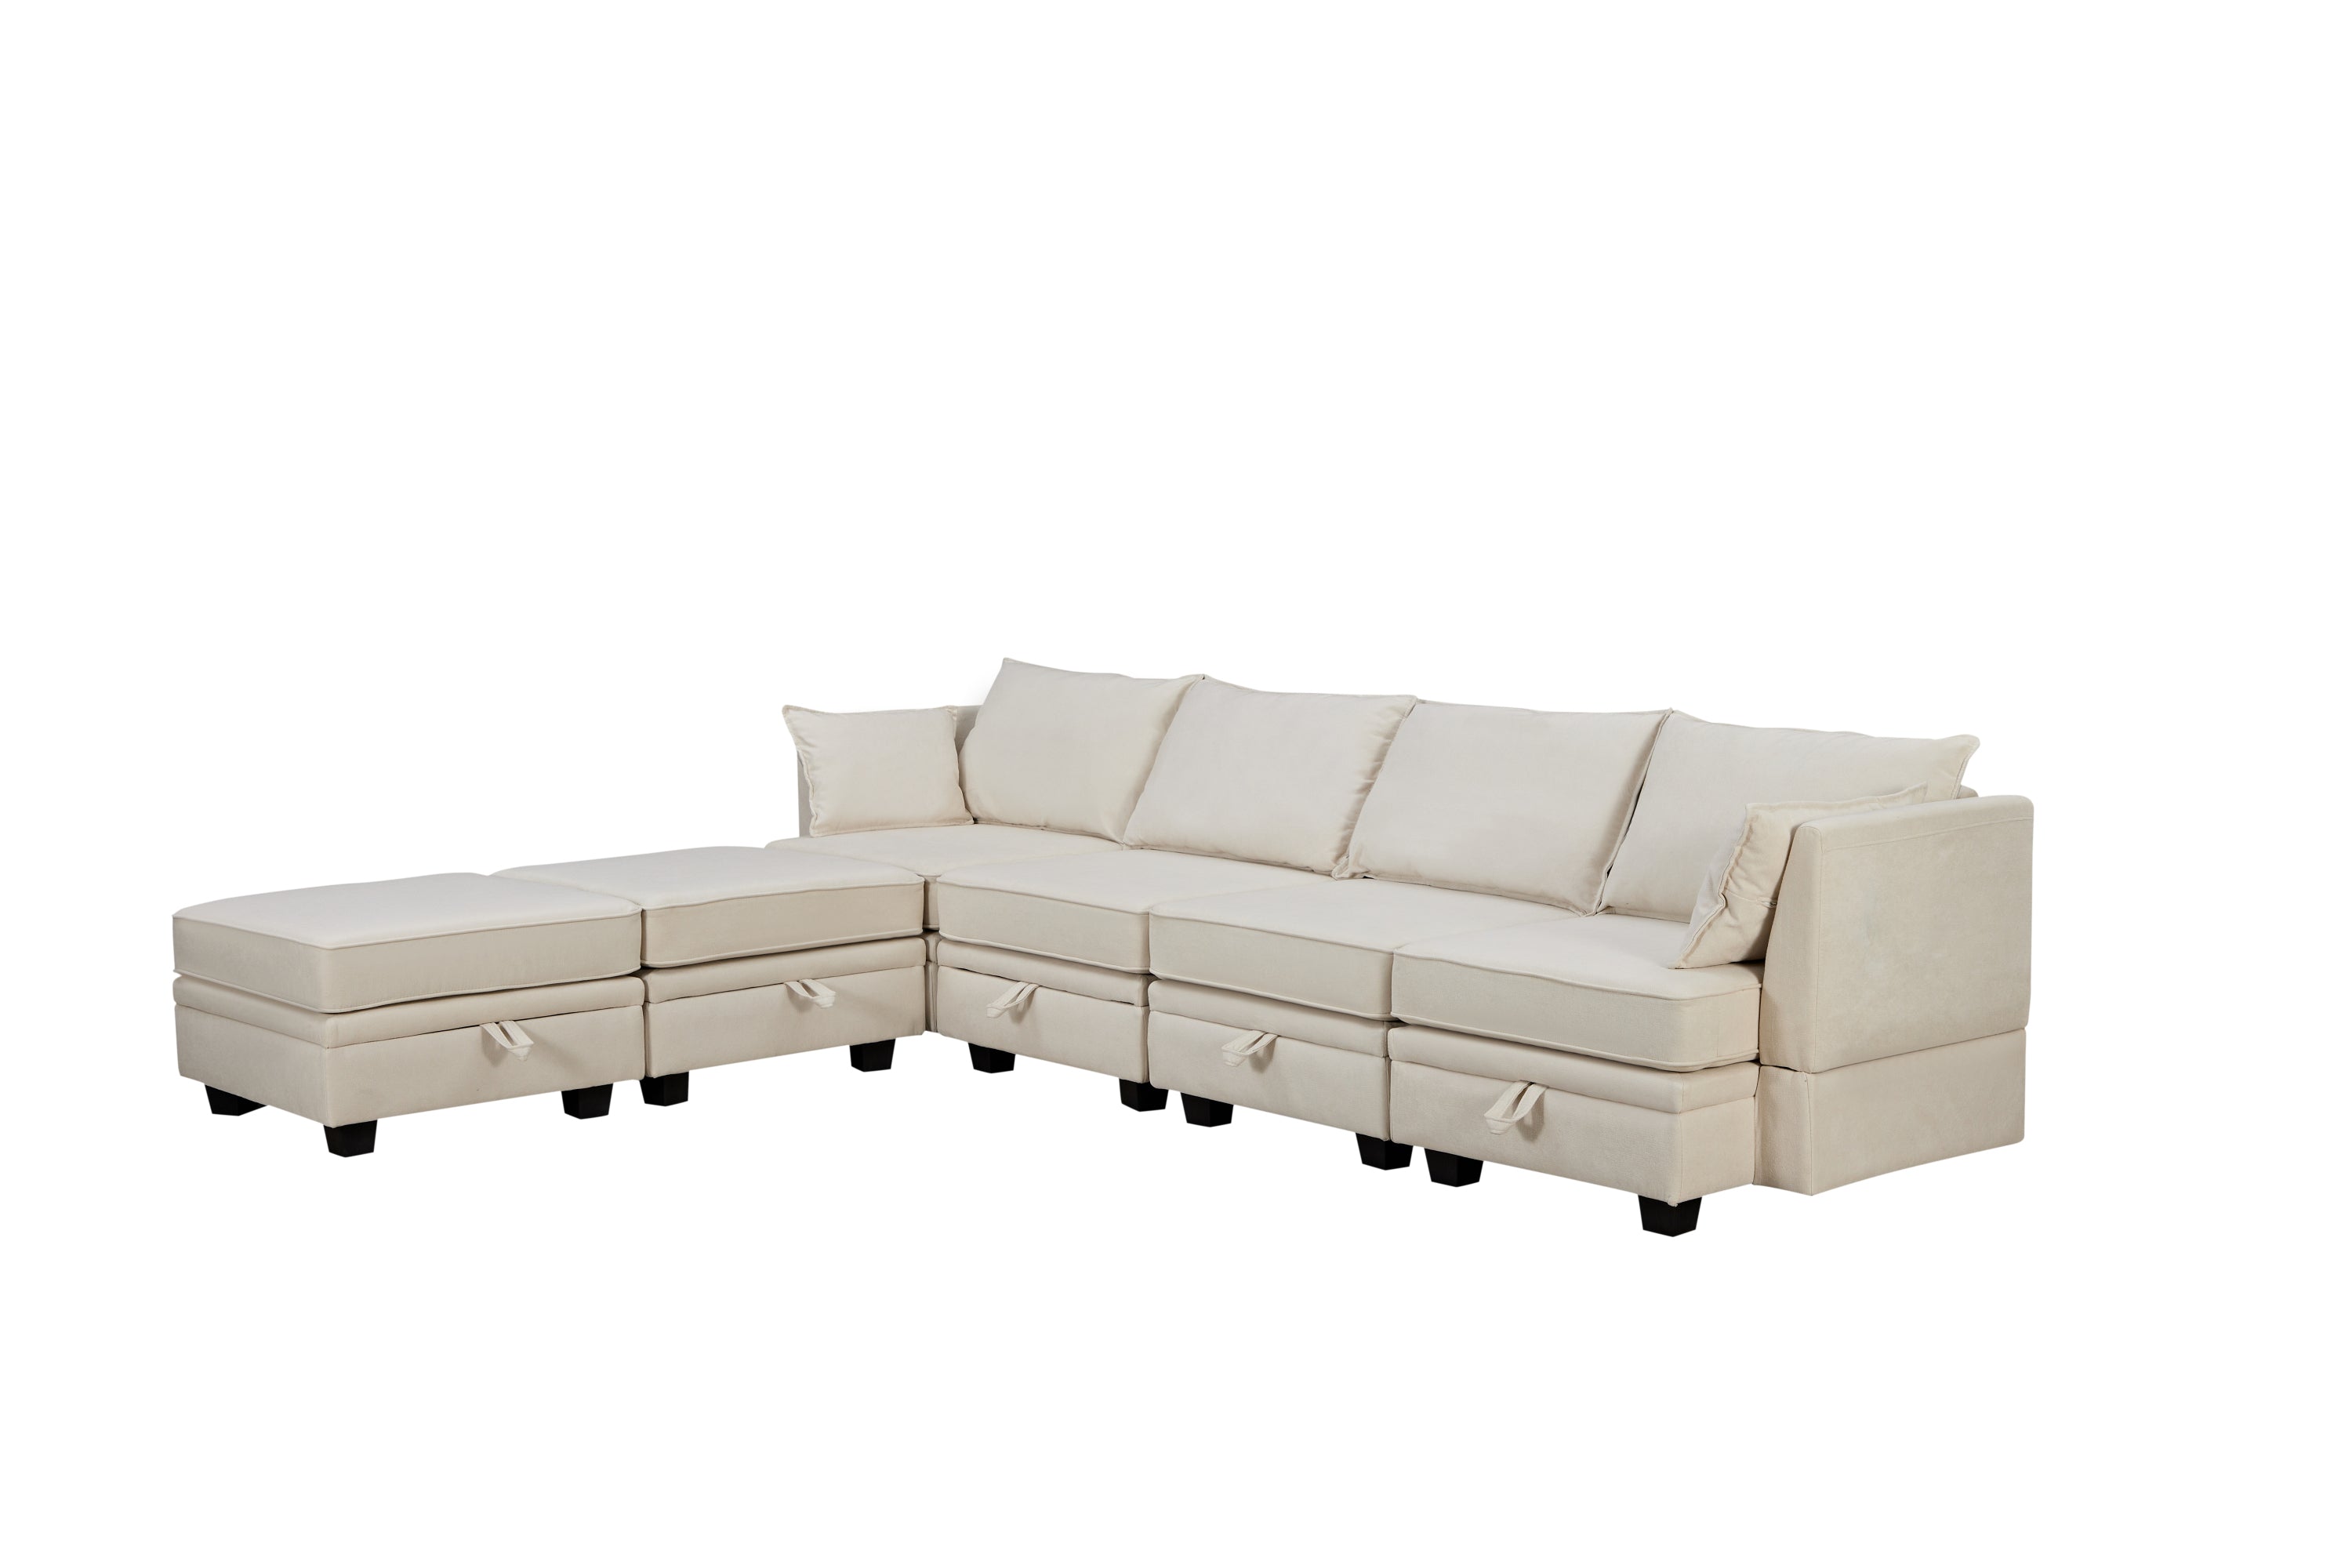 Large U-Shape Sectional Sofa: Convertible Bed, Reversible Chaise, Storage Beige-Stationary Sectionals-American Furniture Outlet